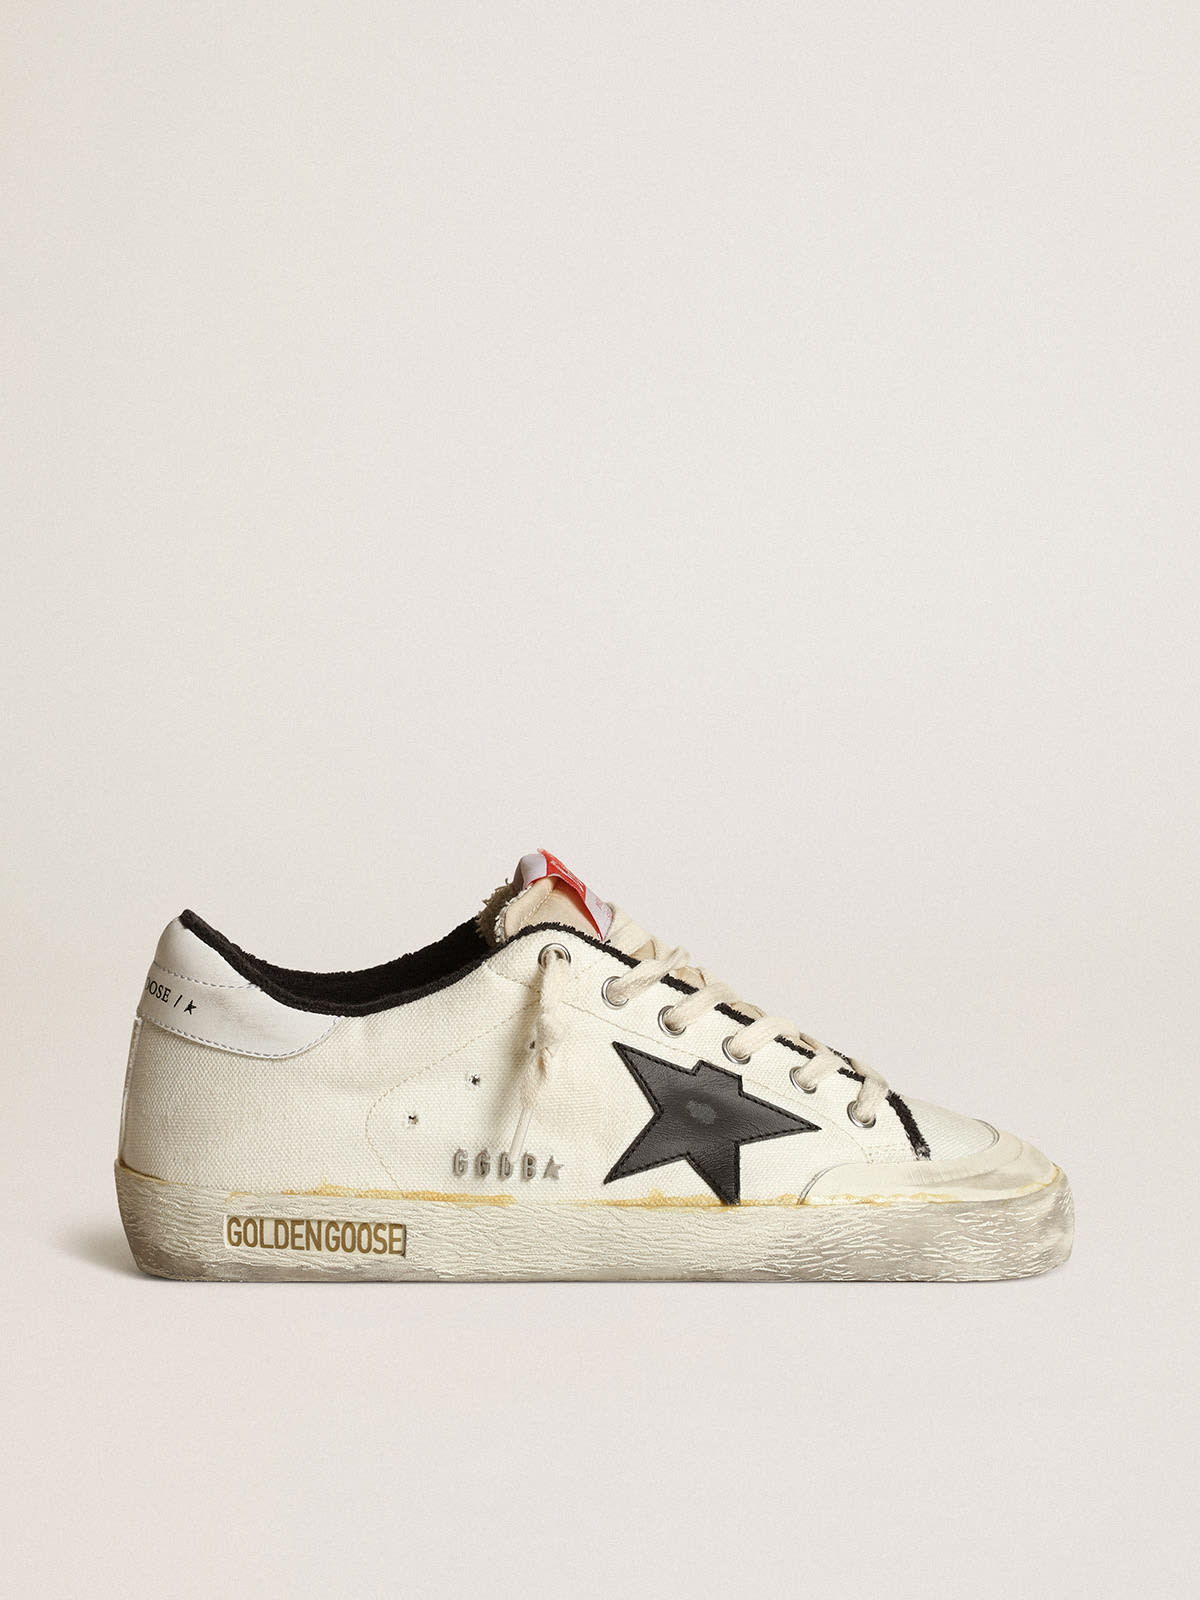 Golden Goose Saldi Women’s Super-Star LTD sneakers in beige canvas with black leather star and white leather heel tab